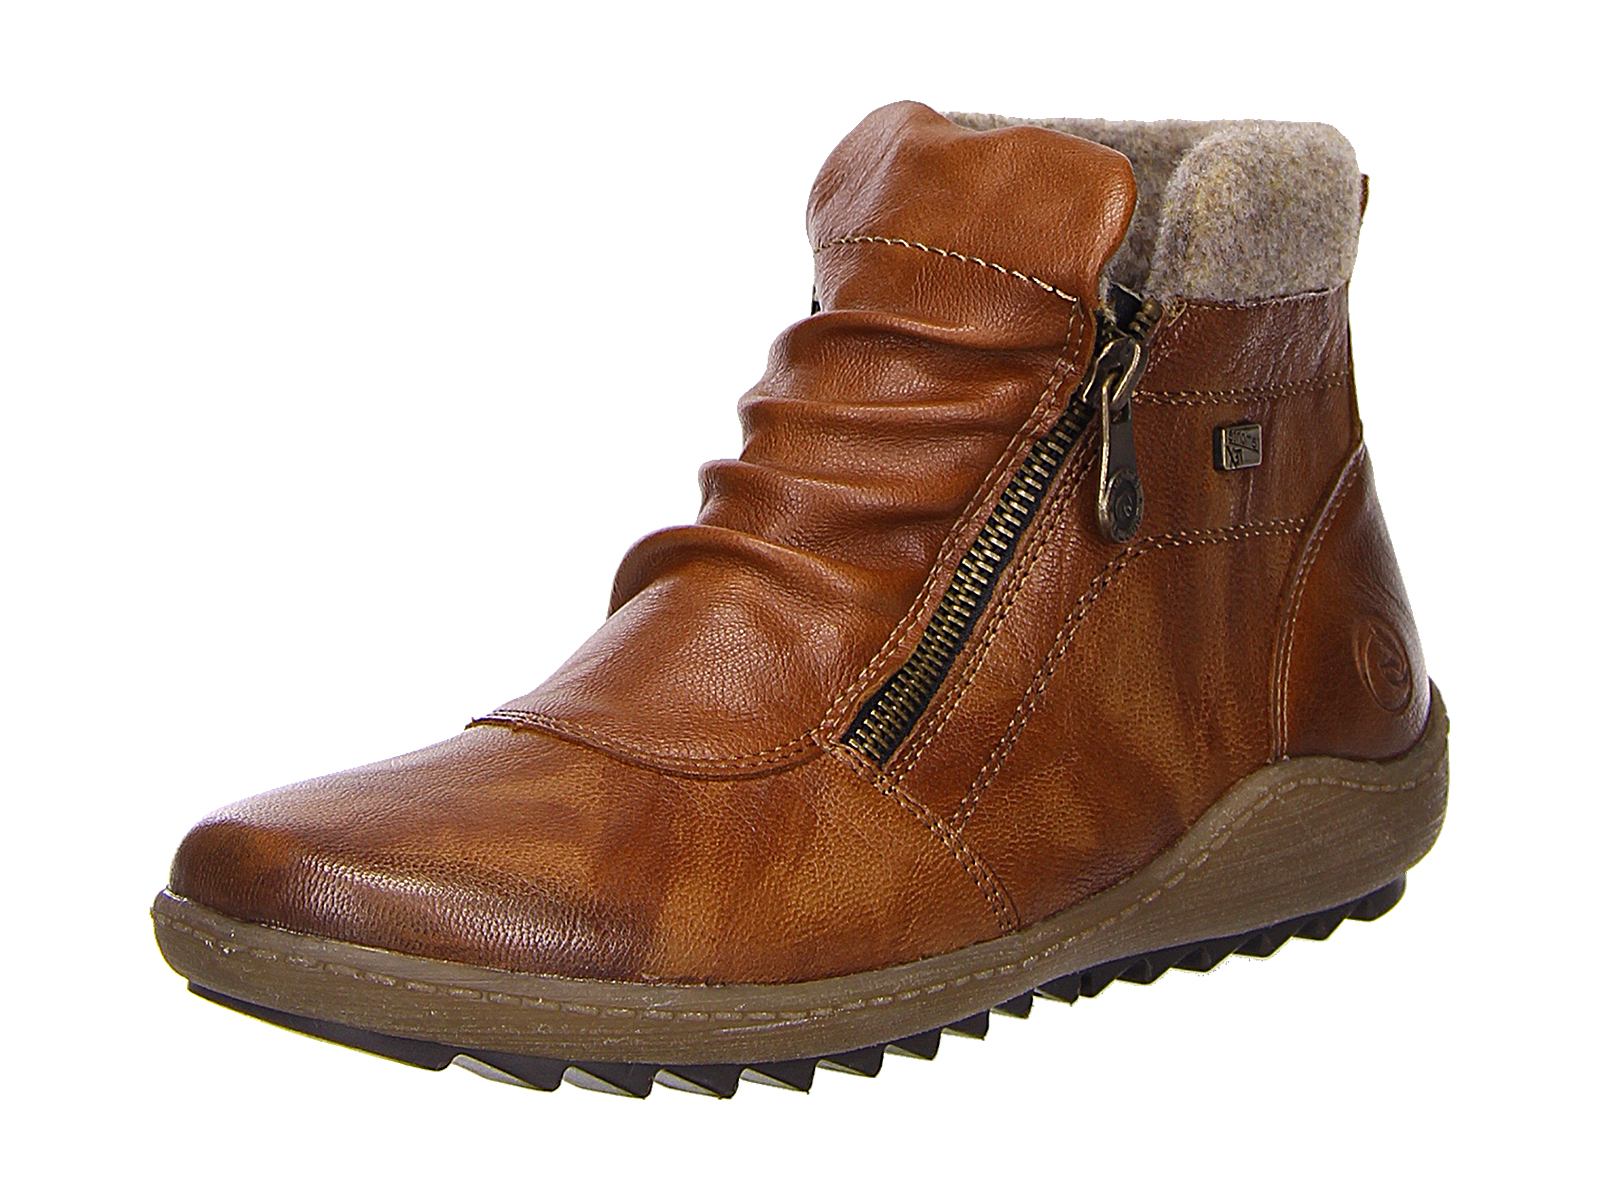 Remonte Boots R1486-22